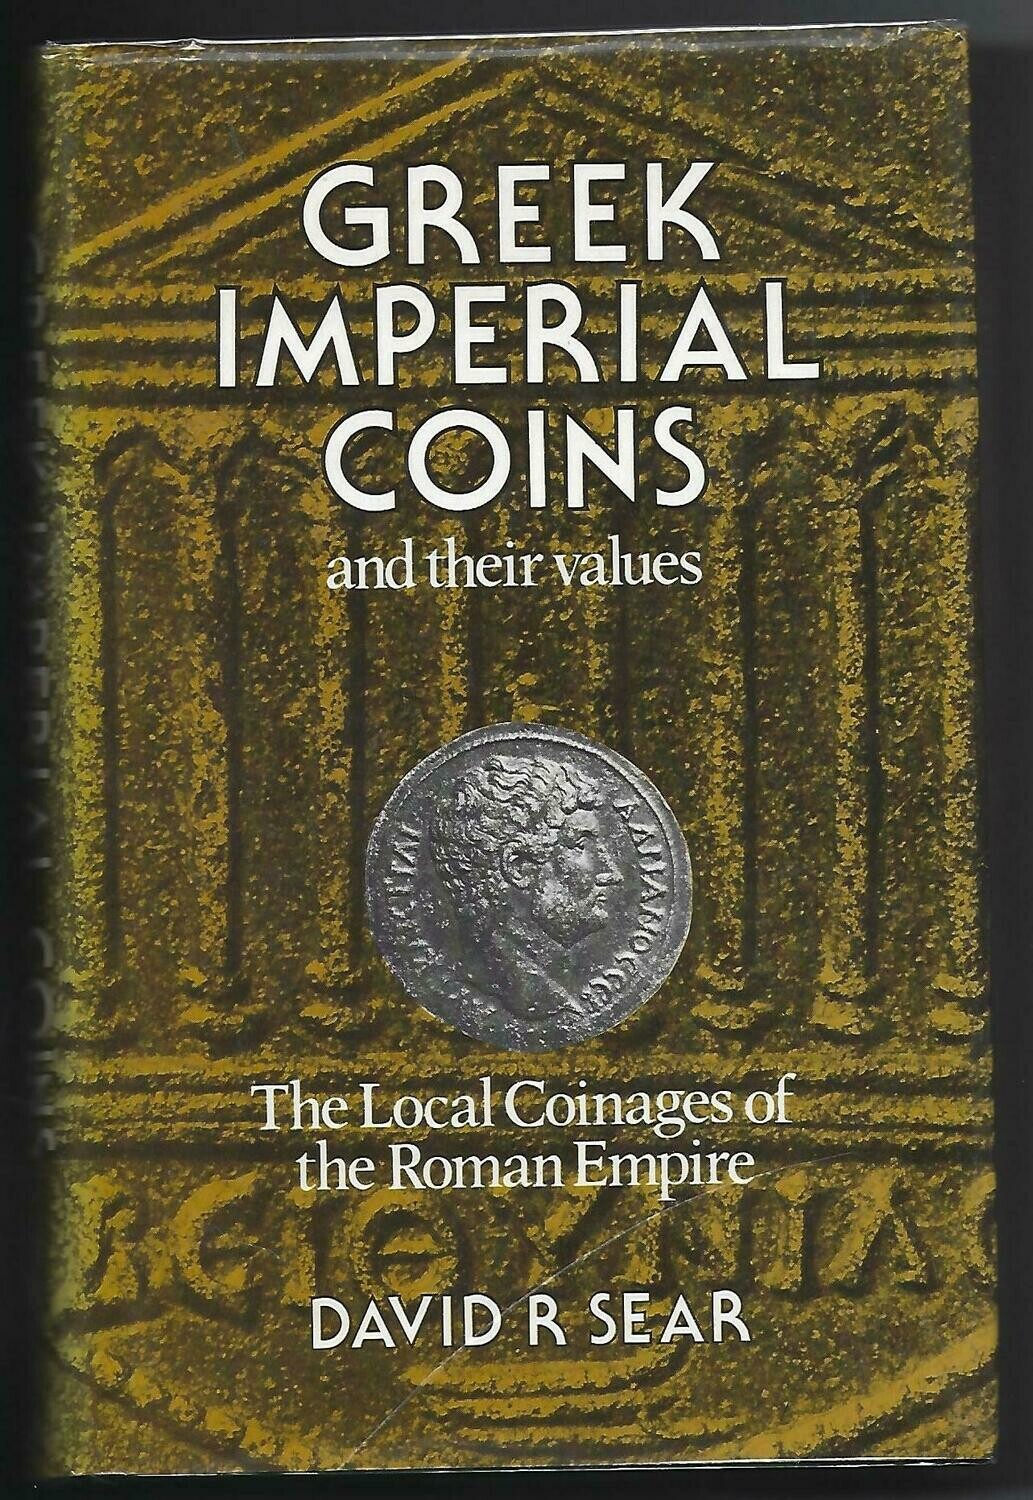 Ancients; David R. Sear, "Greek Imperial Coins and their values."